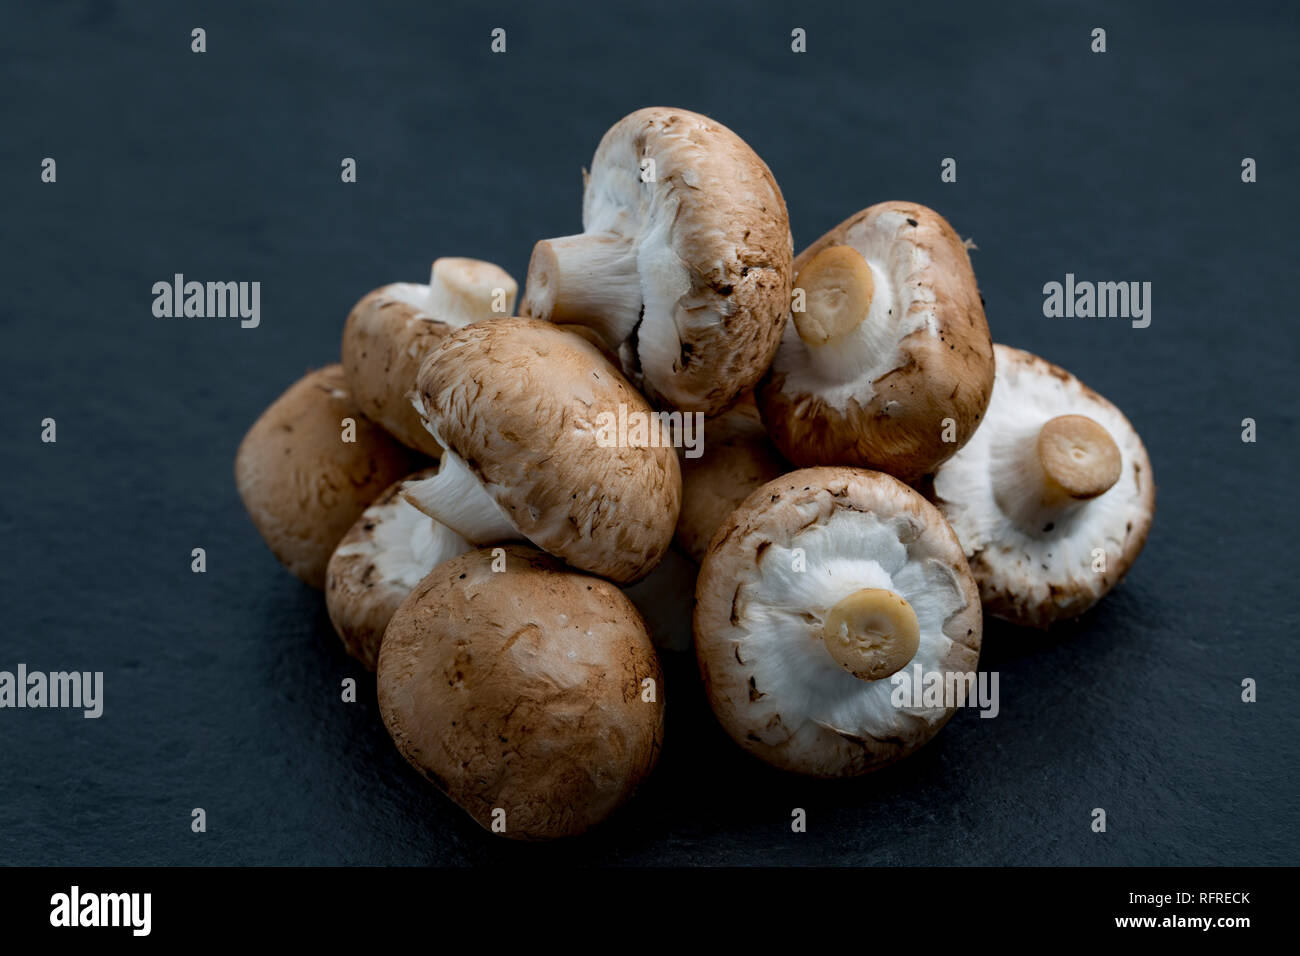 A heap of chestnut mushrooms bought from a supermarket in the UK photographed on a dark, stone background. Dorset England UK GB Stock Photo